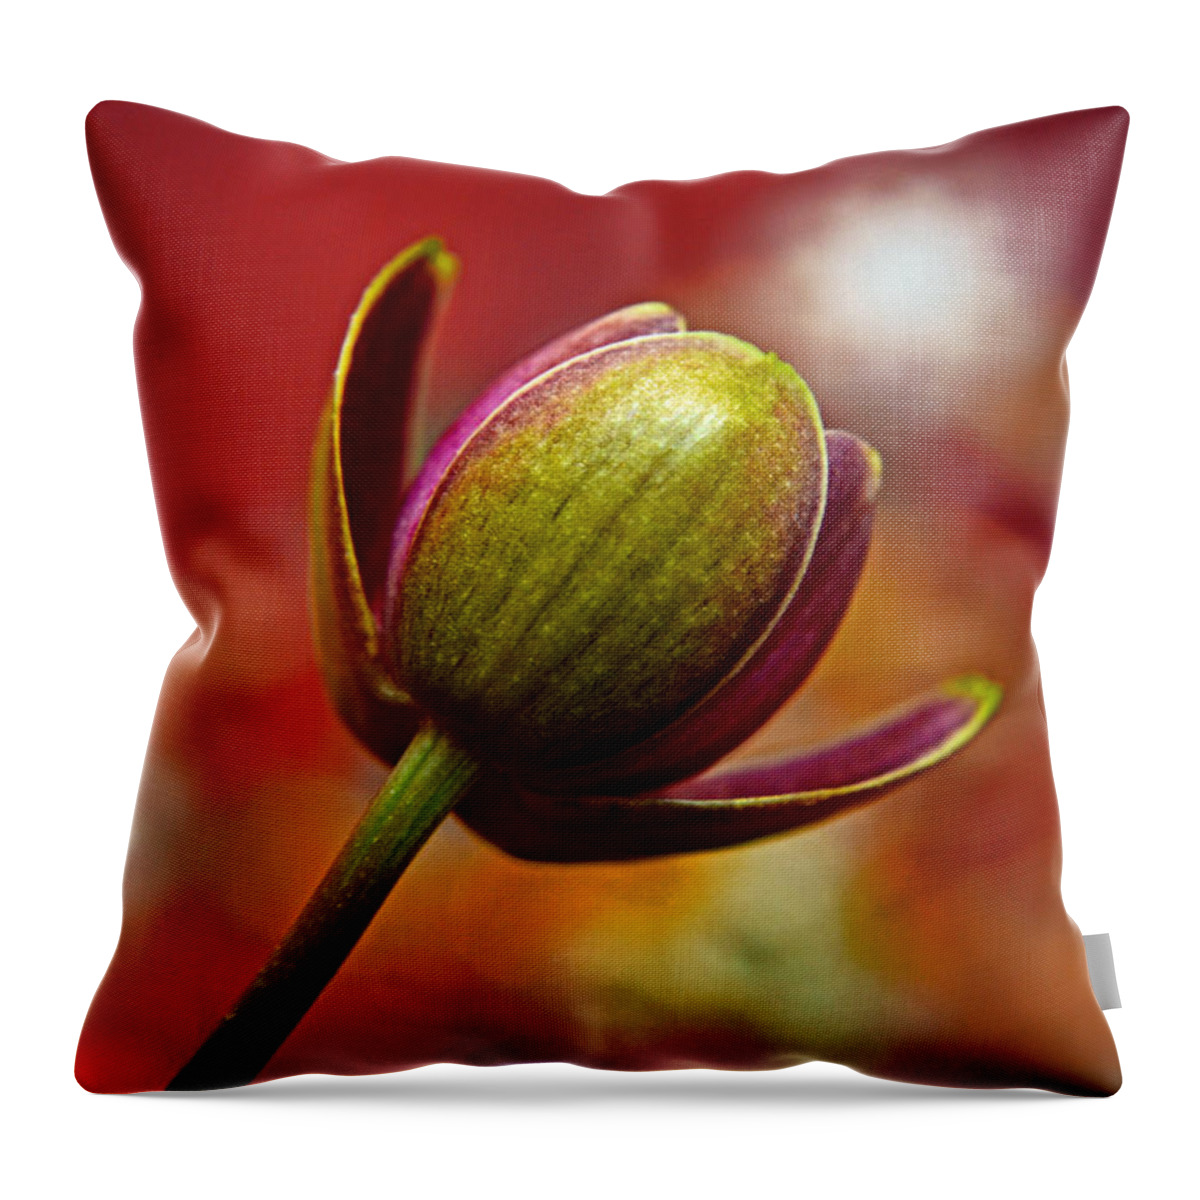 Orchid Throw Pillow featuring the photograph Orchid Unfurled by Mary Machare